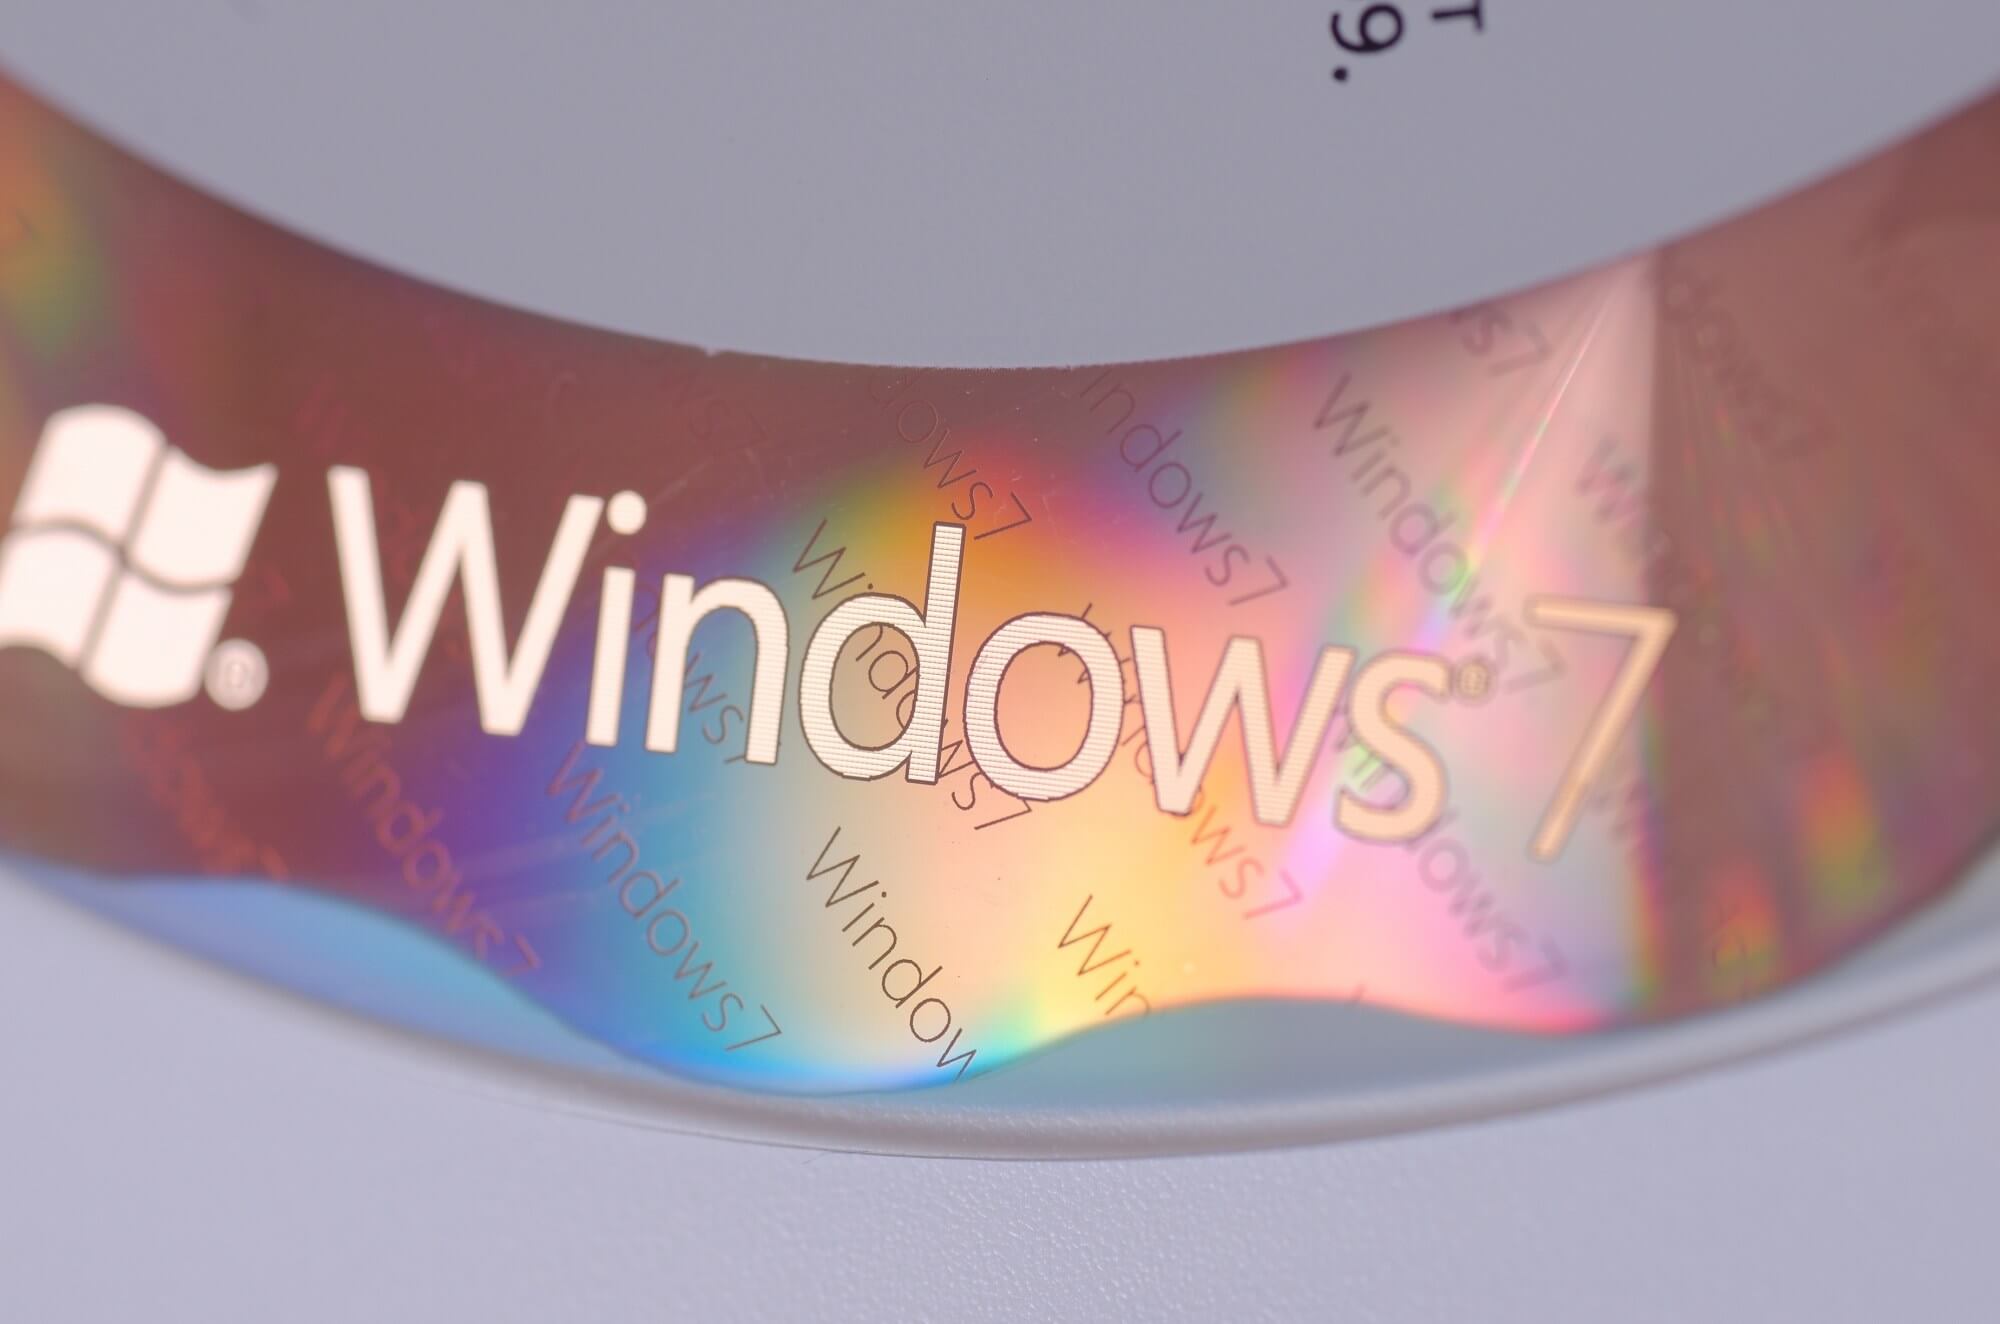 Microsoft reveals how much Windows 7's extended support will cost